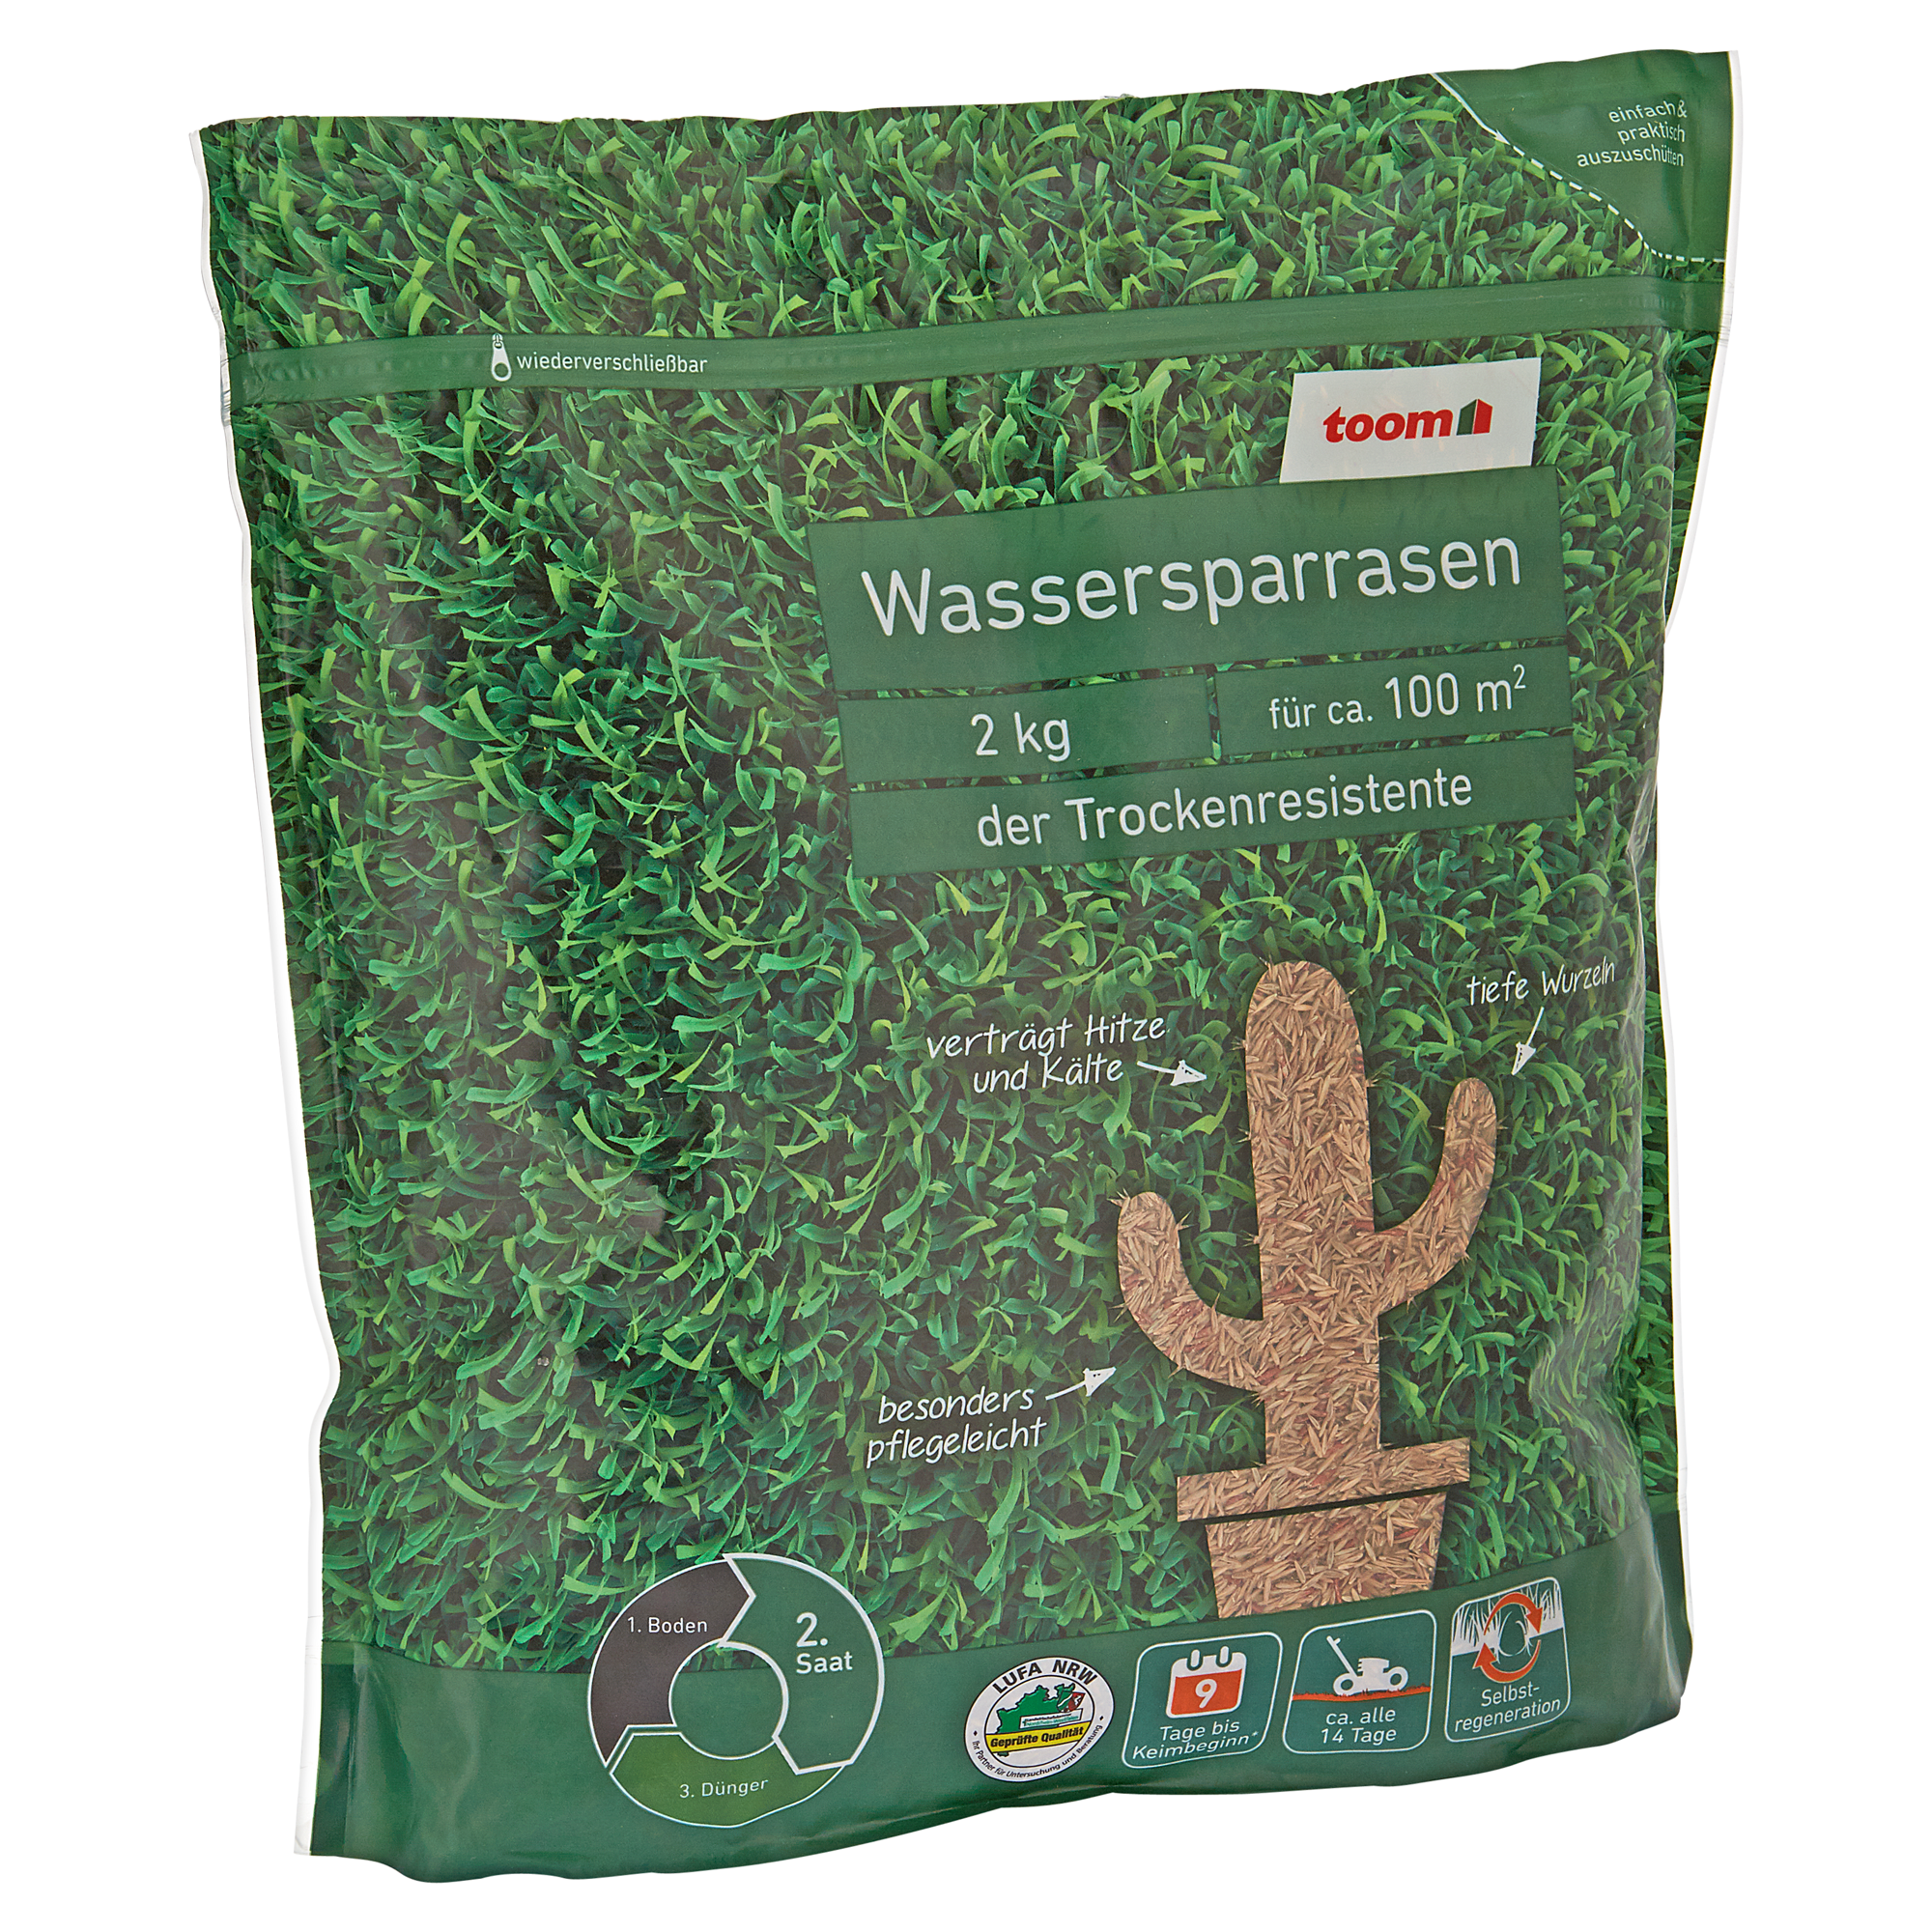 Wassersparrasen 2 kg + product picture